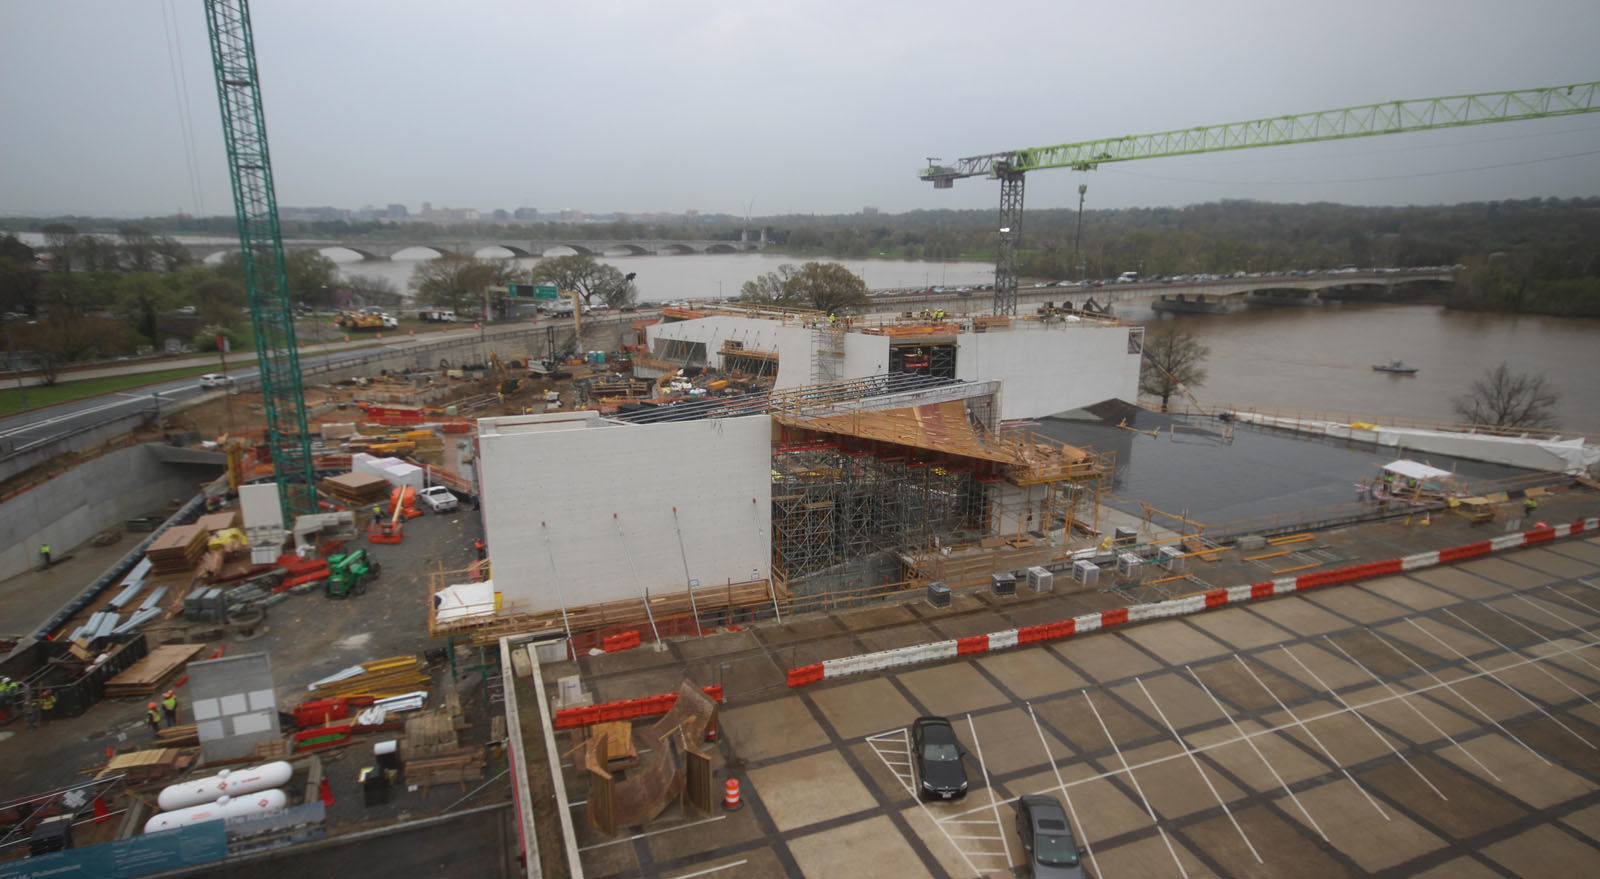 A look at the progress made on the construction of the Kennedy Center's expansion project on April 19, 2018. (Courtesy the Kennedy Center)